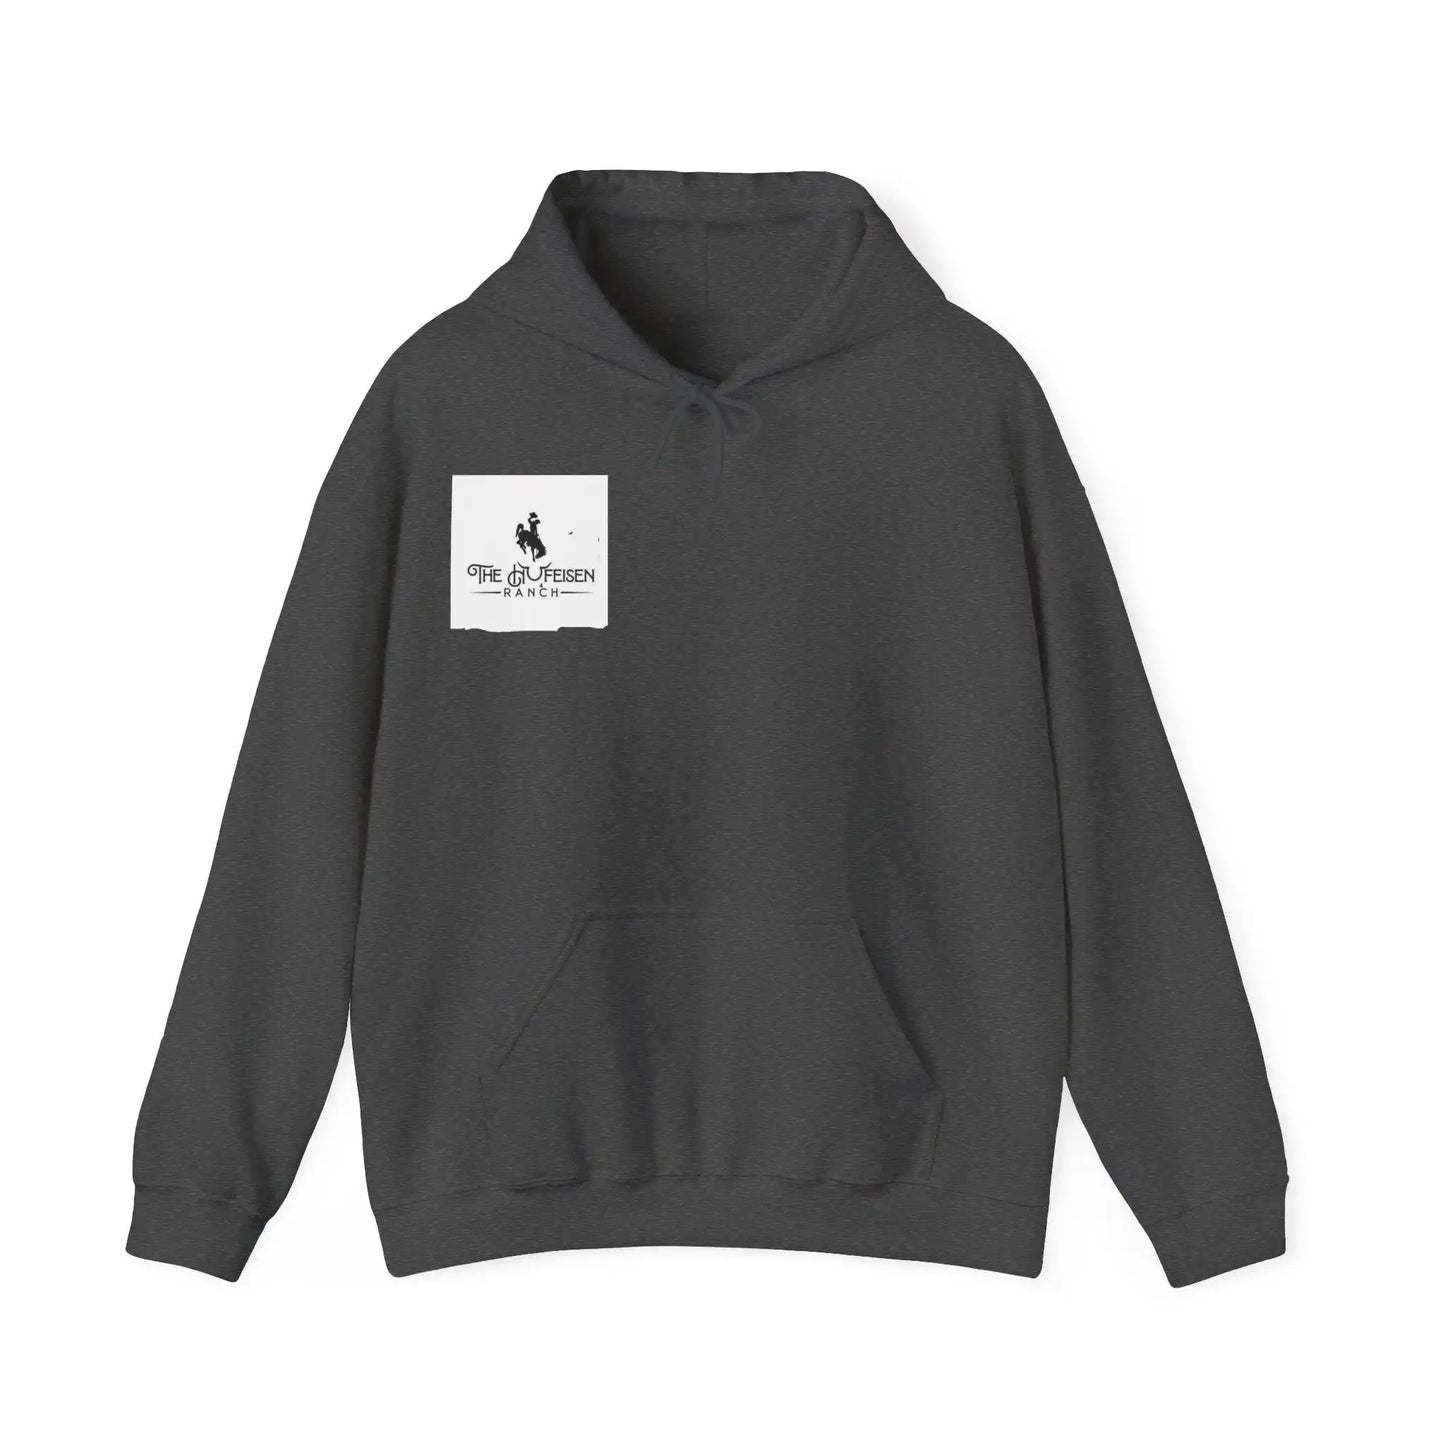 Unisex Heavy Blend™ Hooded SweatshirtThis unisex heavy blend hooded sweatshirt is relaxation itself. Made with a thick blend of cotton and polyester, it feels plush, soft and warm, a perfect choice for Unisex Heavy Blend™ Hooded SweatshirtThe Hufeisen-Ranch (WYO Wagyu)Hoodie